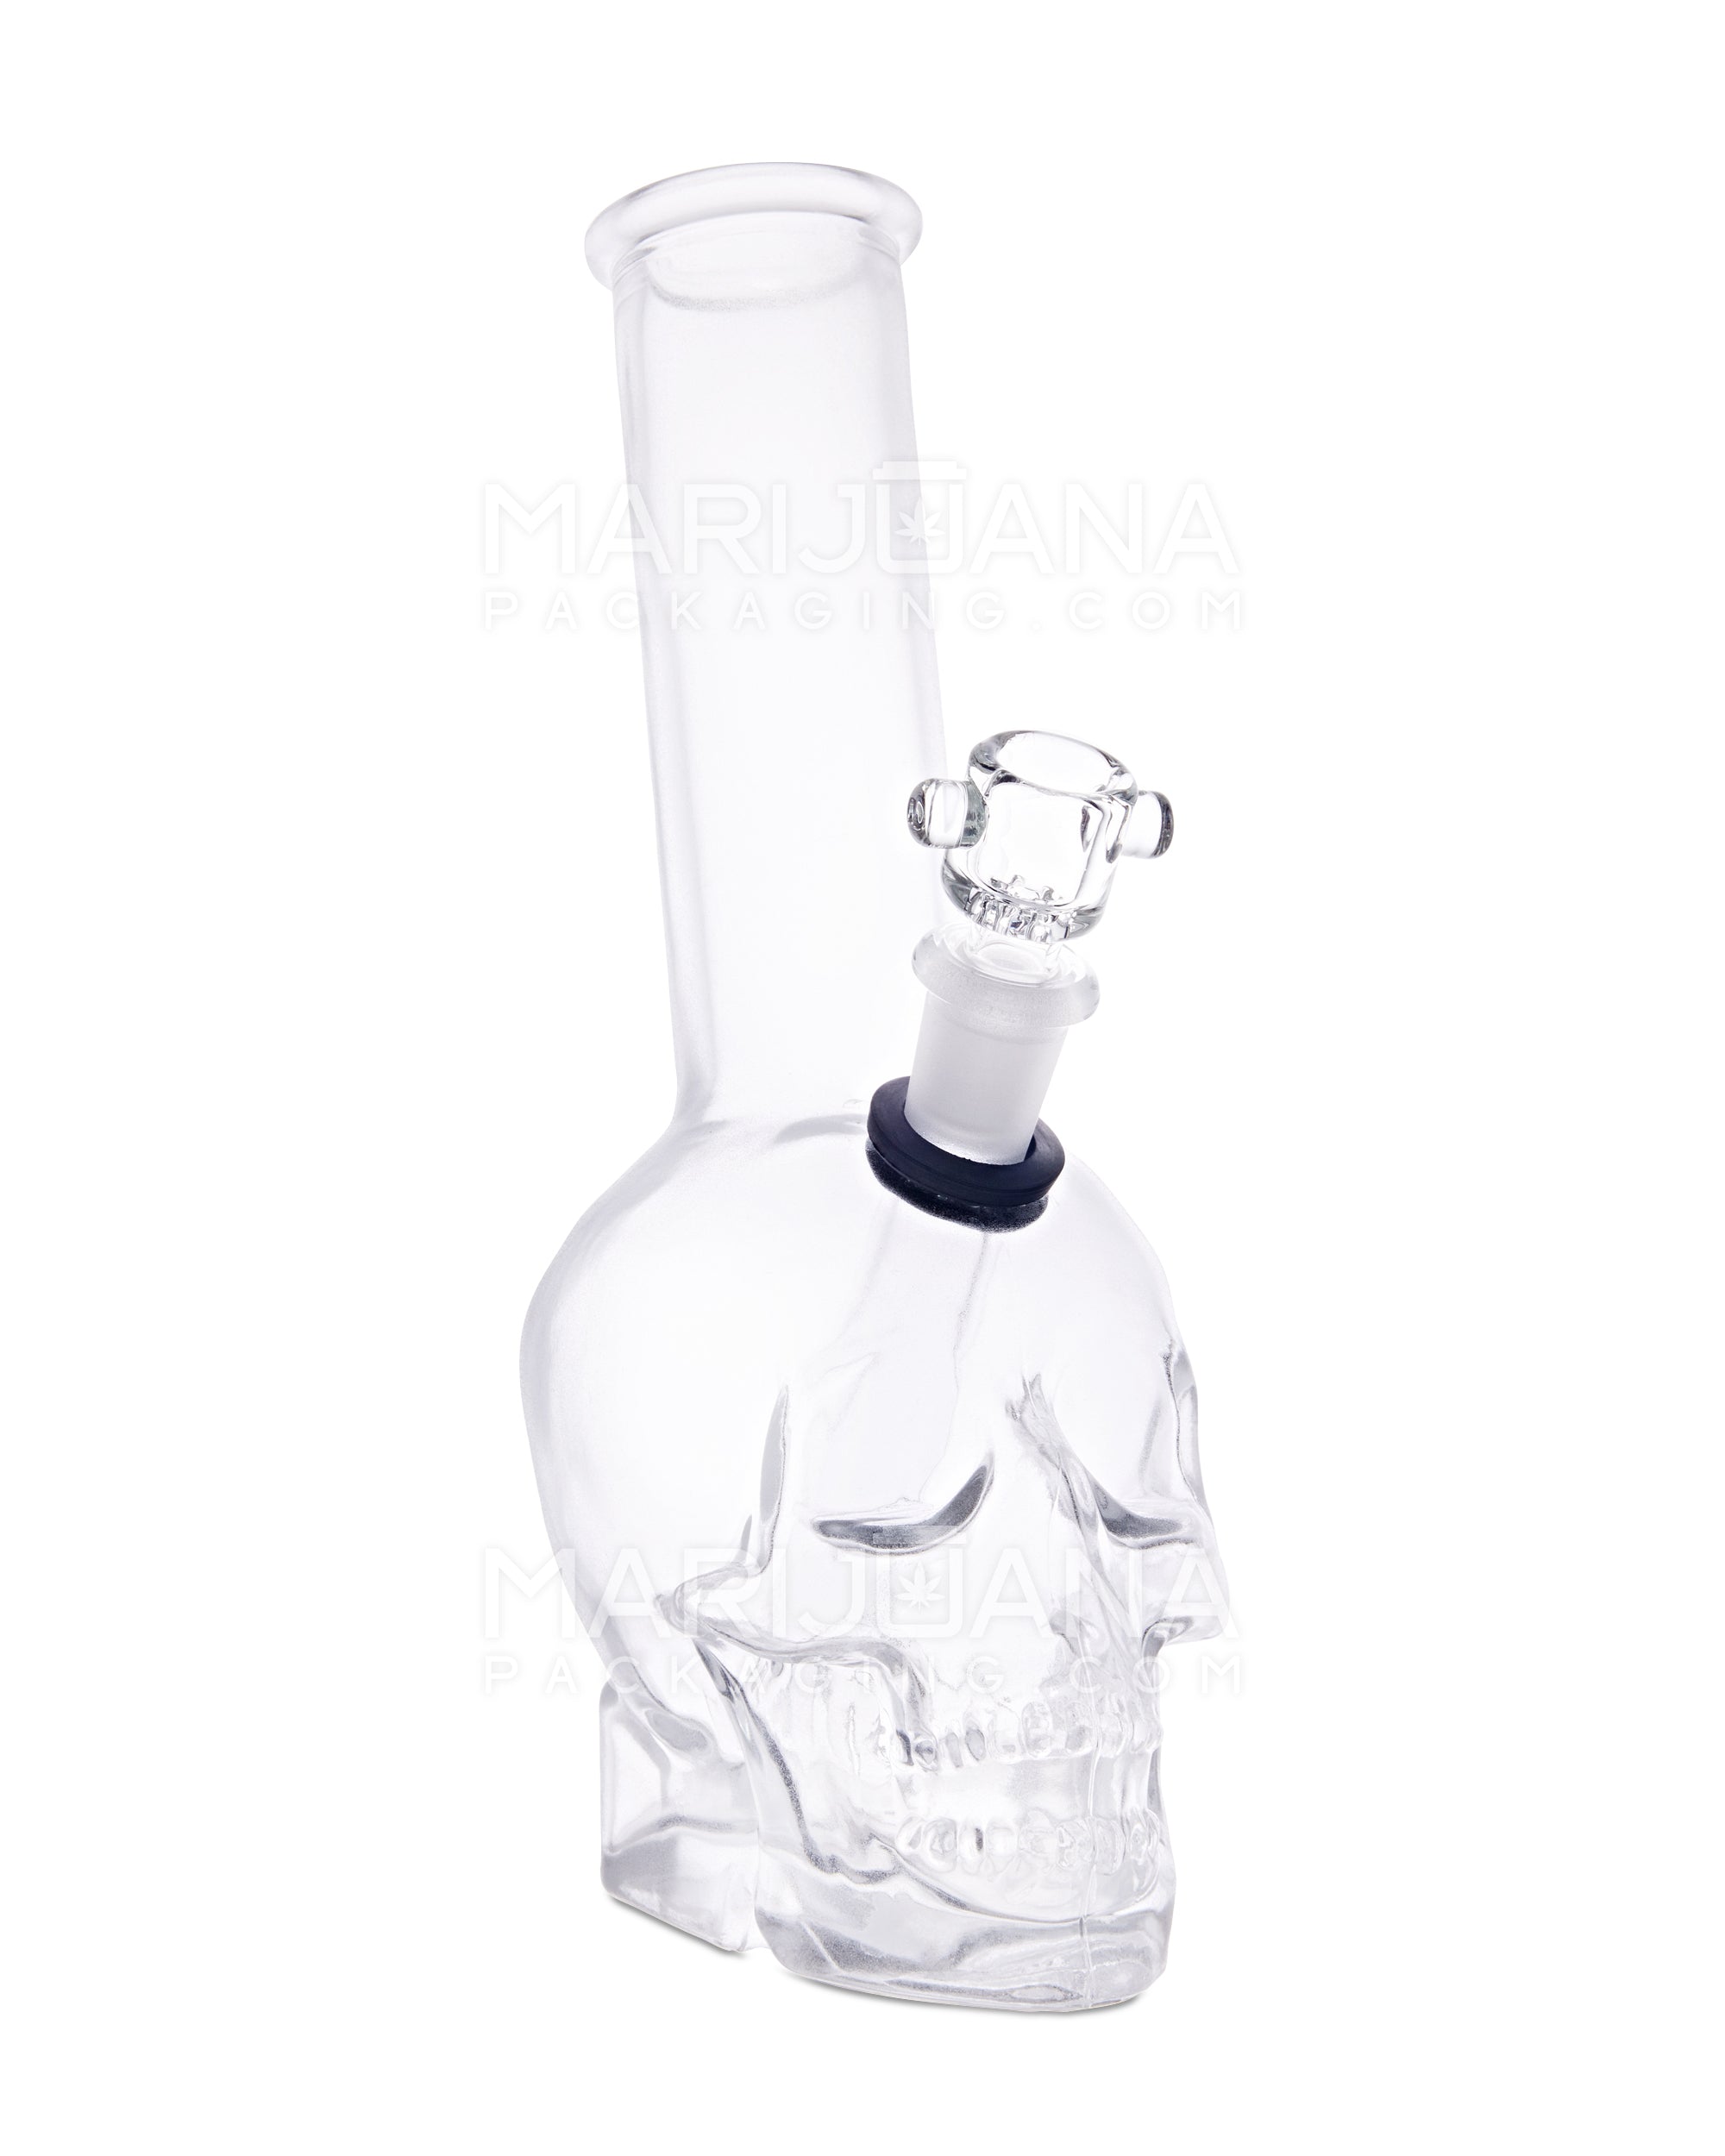 Angled Neck Crystal Skull Head Decal Glass Water Pipe | 9.5in Tall - Grommet Bowl - Assorted - 5